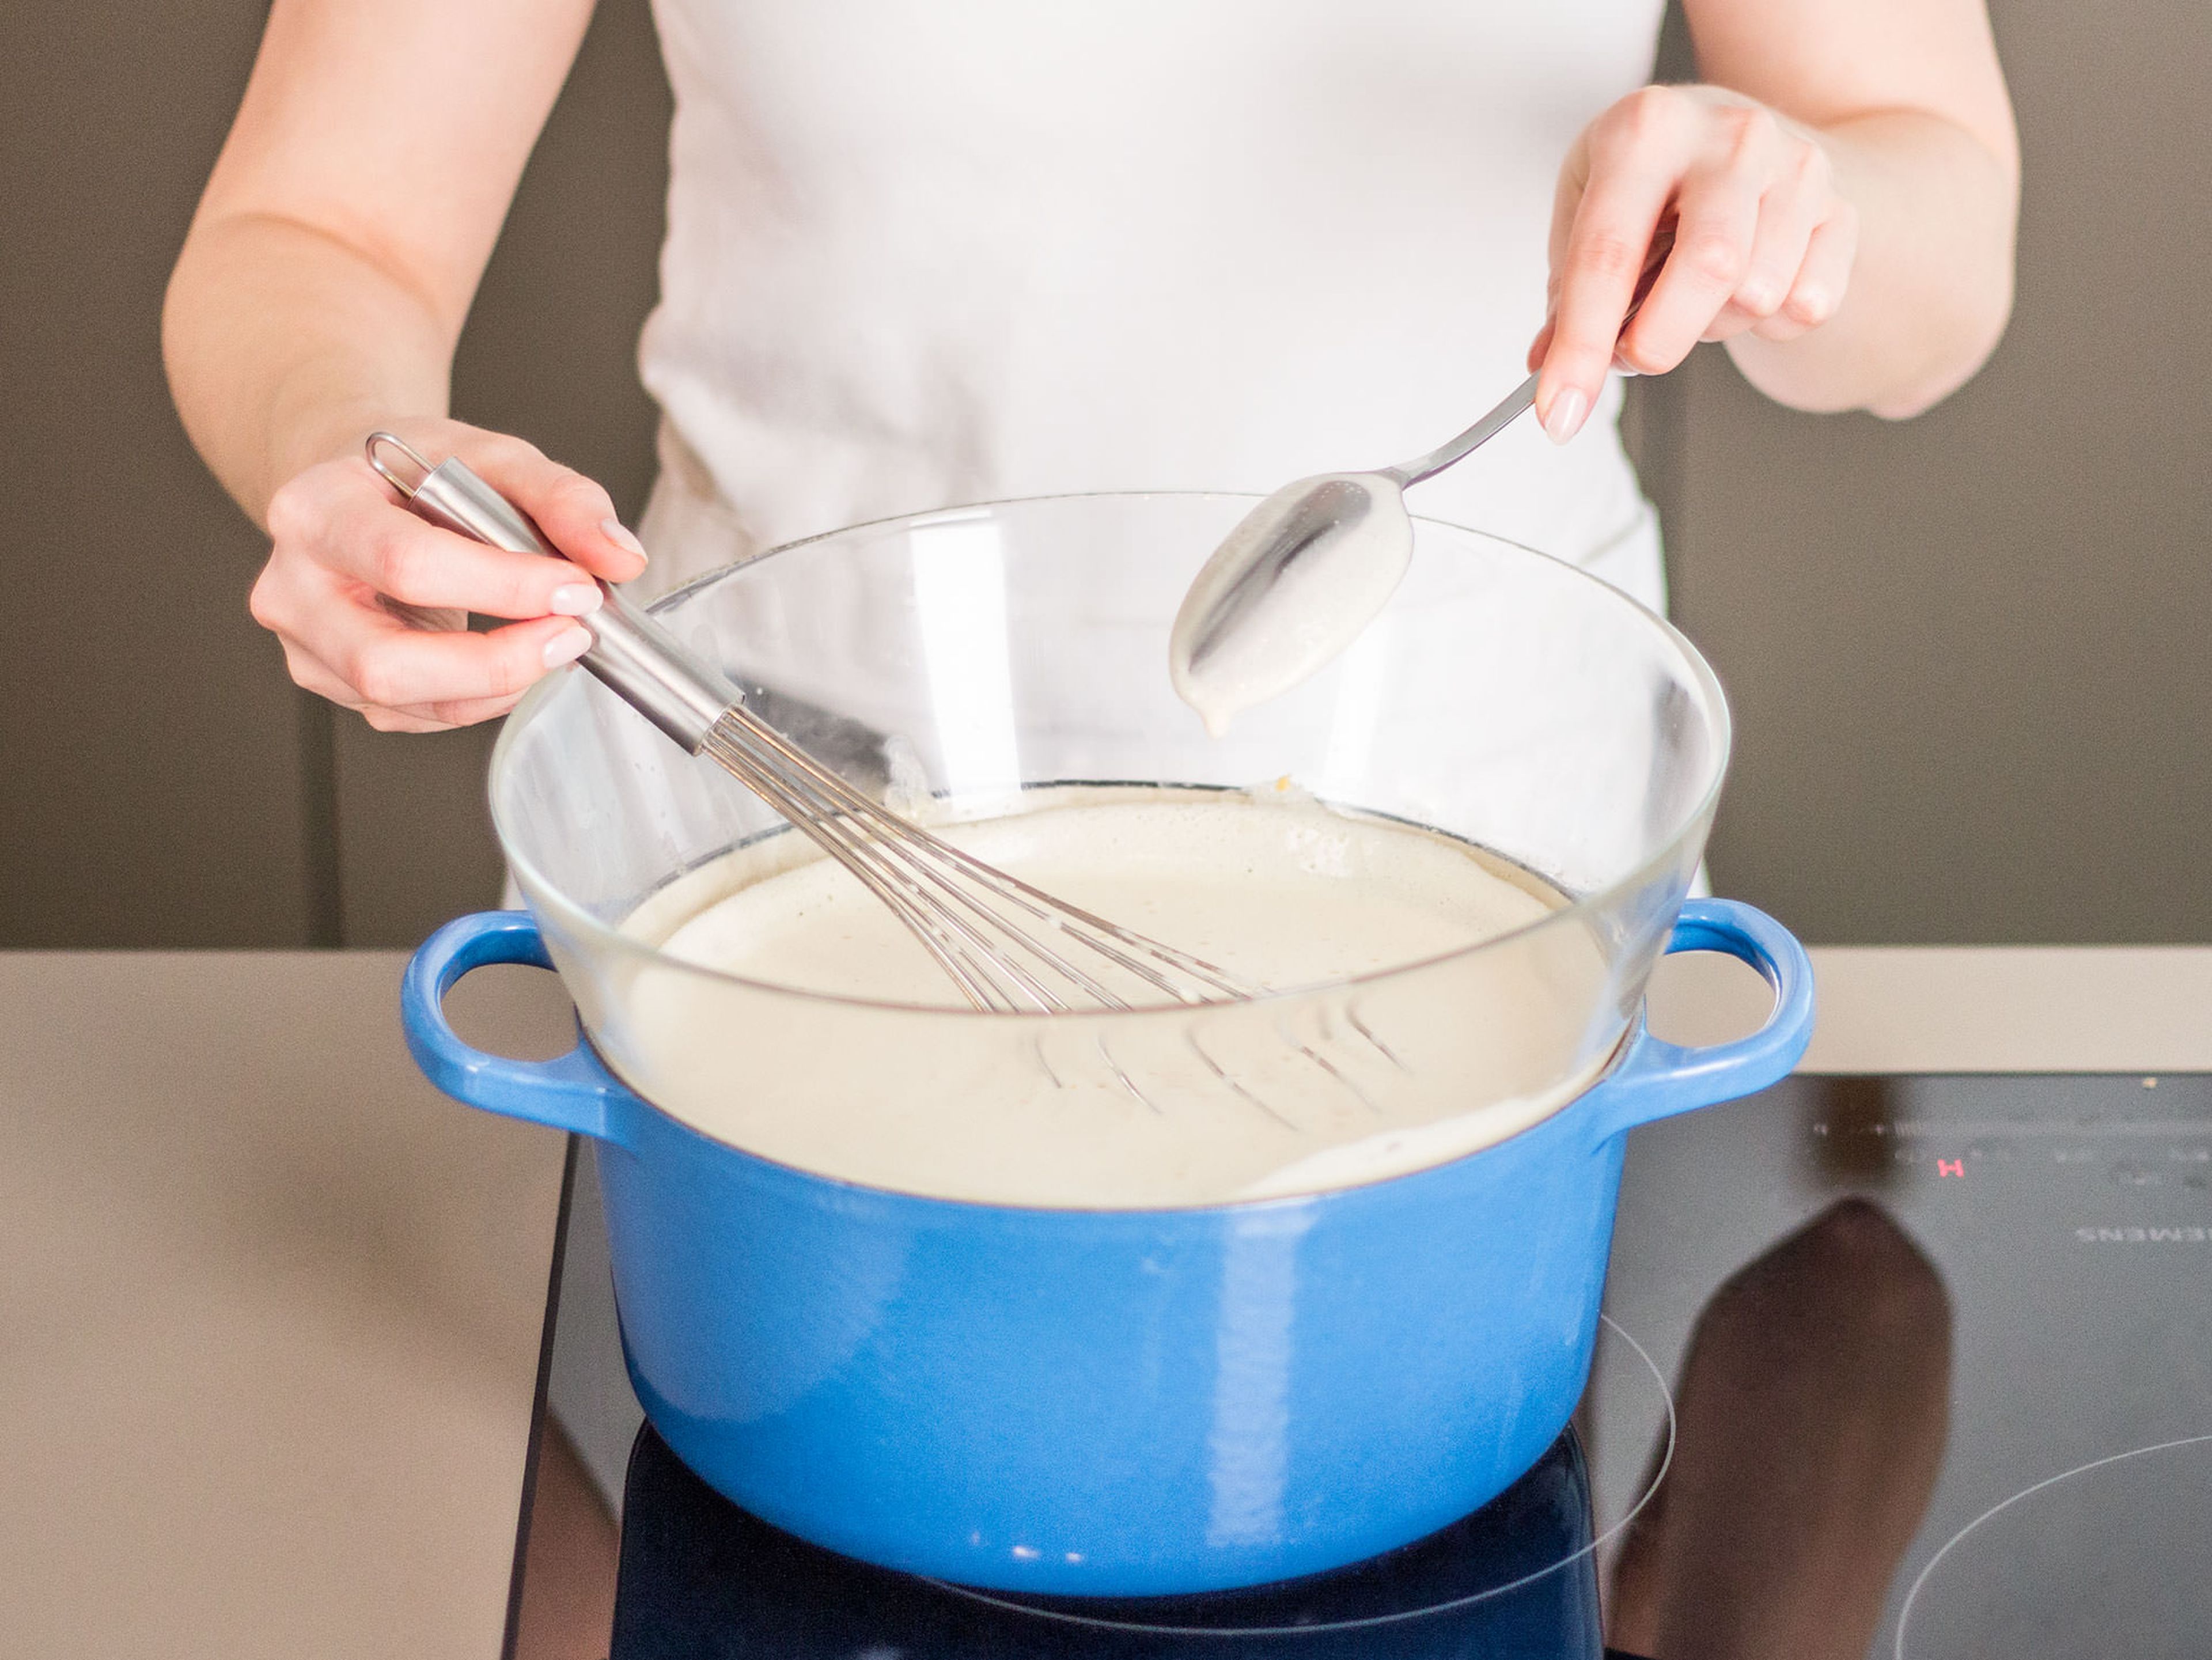 Transfer mixture to a clean bowl and heat over a double boiler, whisking constantly, until thickened slightly. To test for doneness, dip a spoon into the mixture to coat the spoon, then drag your finger down the back; if a clear path remains where your finger was, it’s ready.